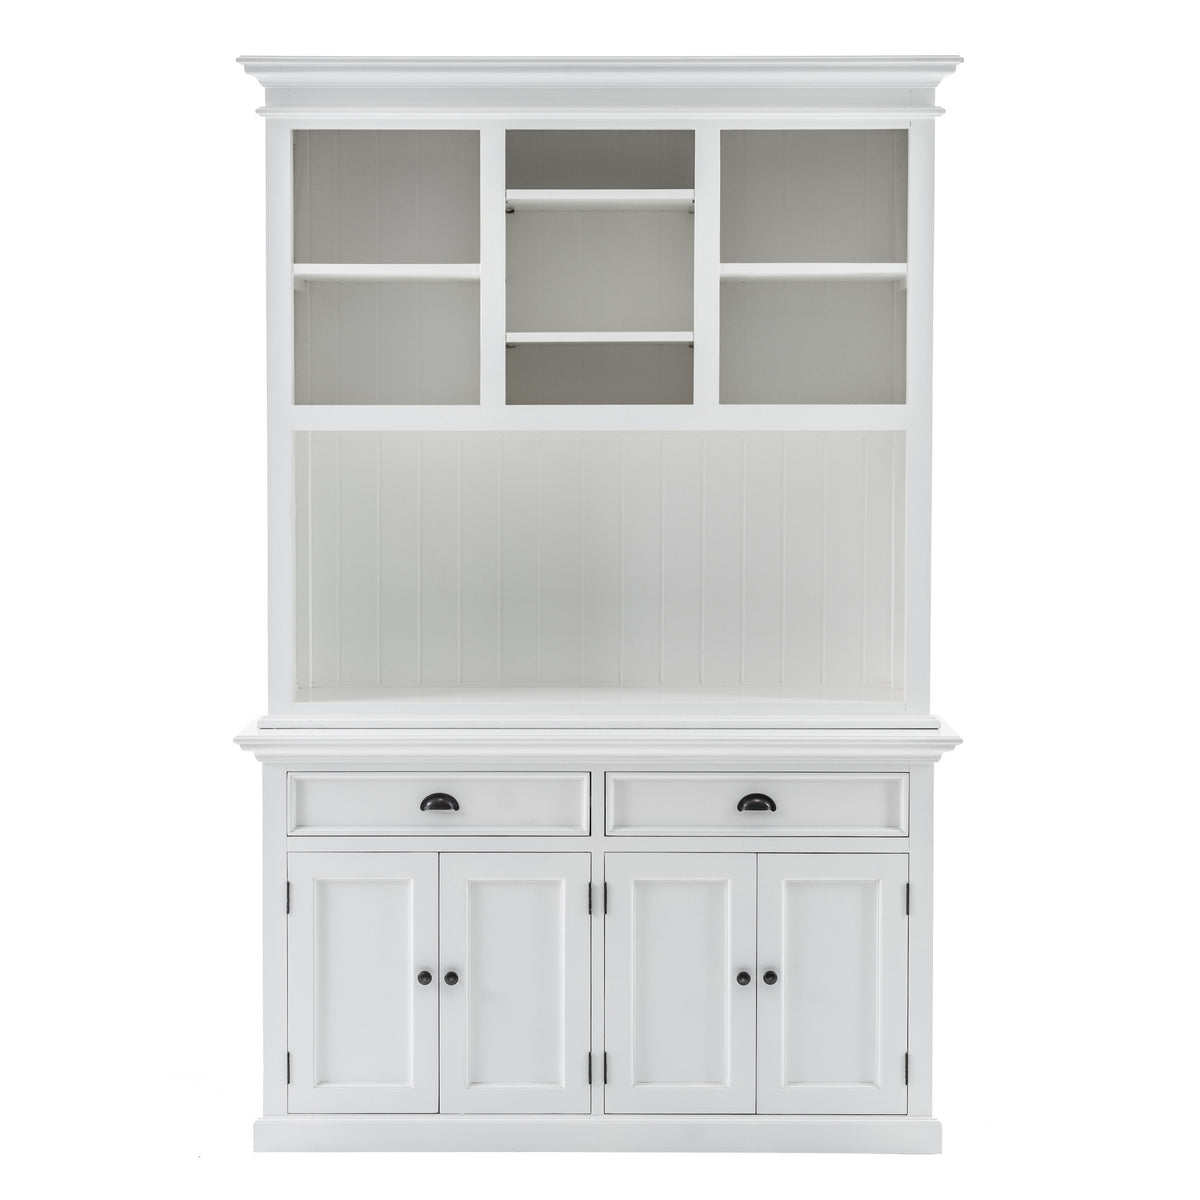 Halifax Buffet Hutch Unit with 2 Adjustable Shelves - Classic White - Notbrand